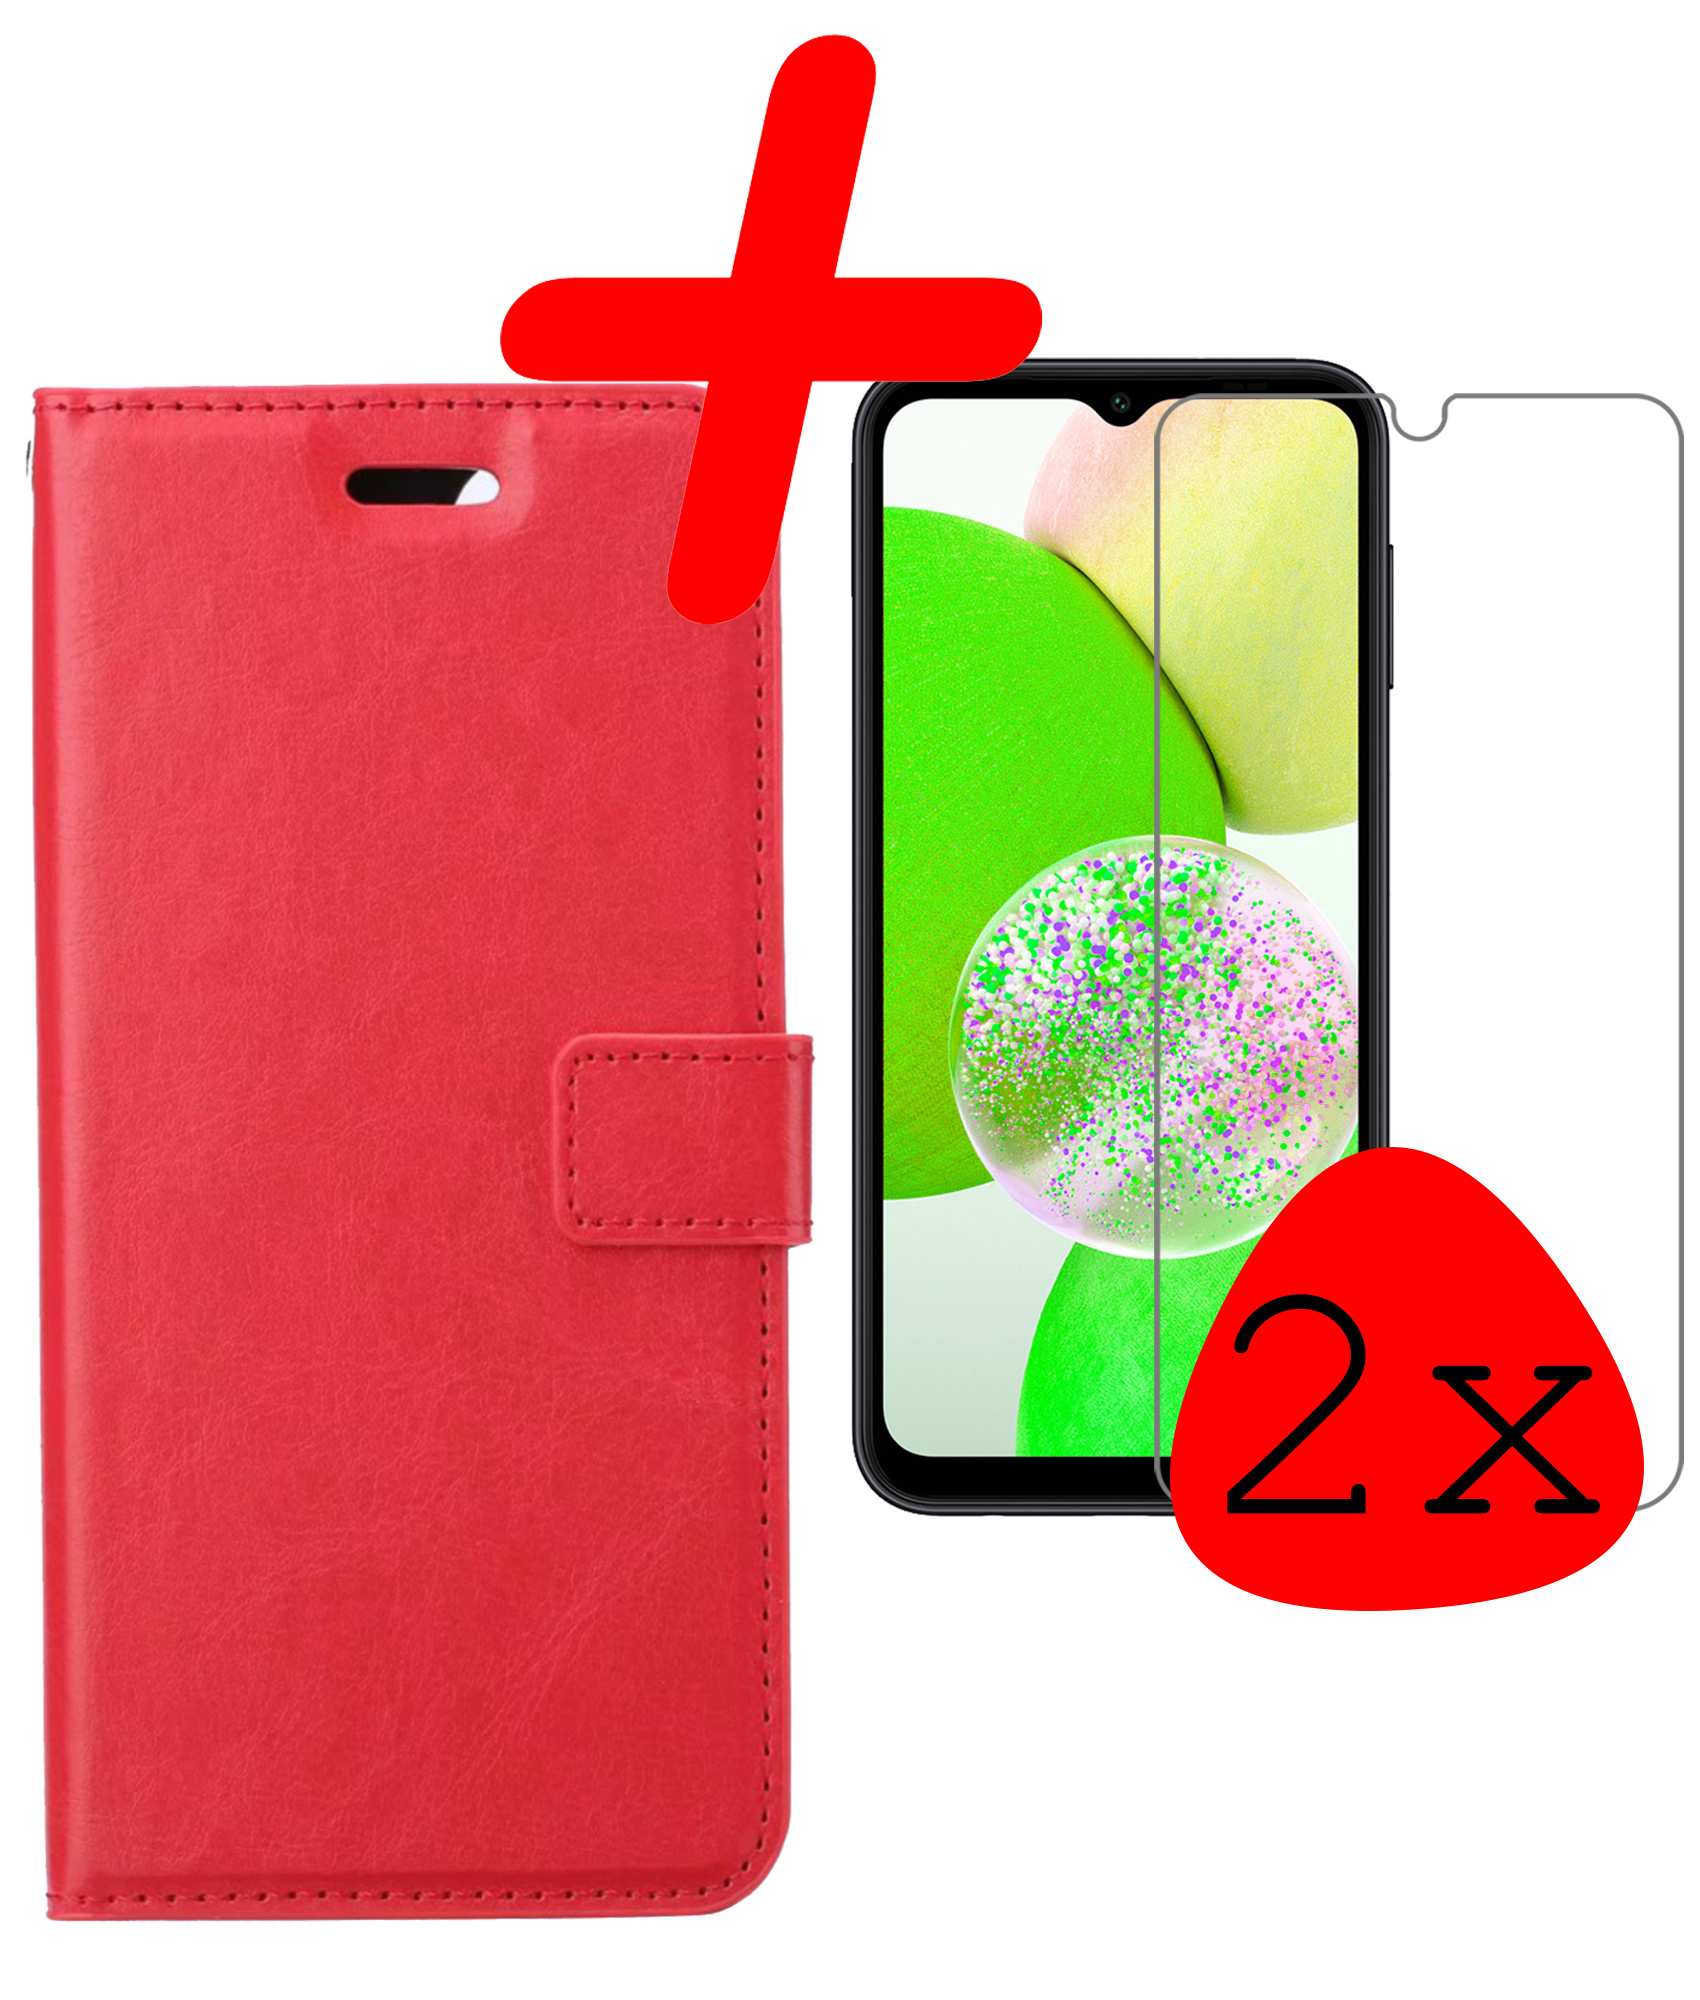 Samsung Galaxy A14 Hoesje Bookcase Hoes Flip Case Book Cover 2x Met Screenprotector - Samsung A14 Hoes Book Case Hoesje - Rood